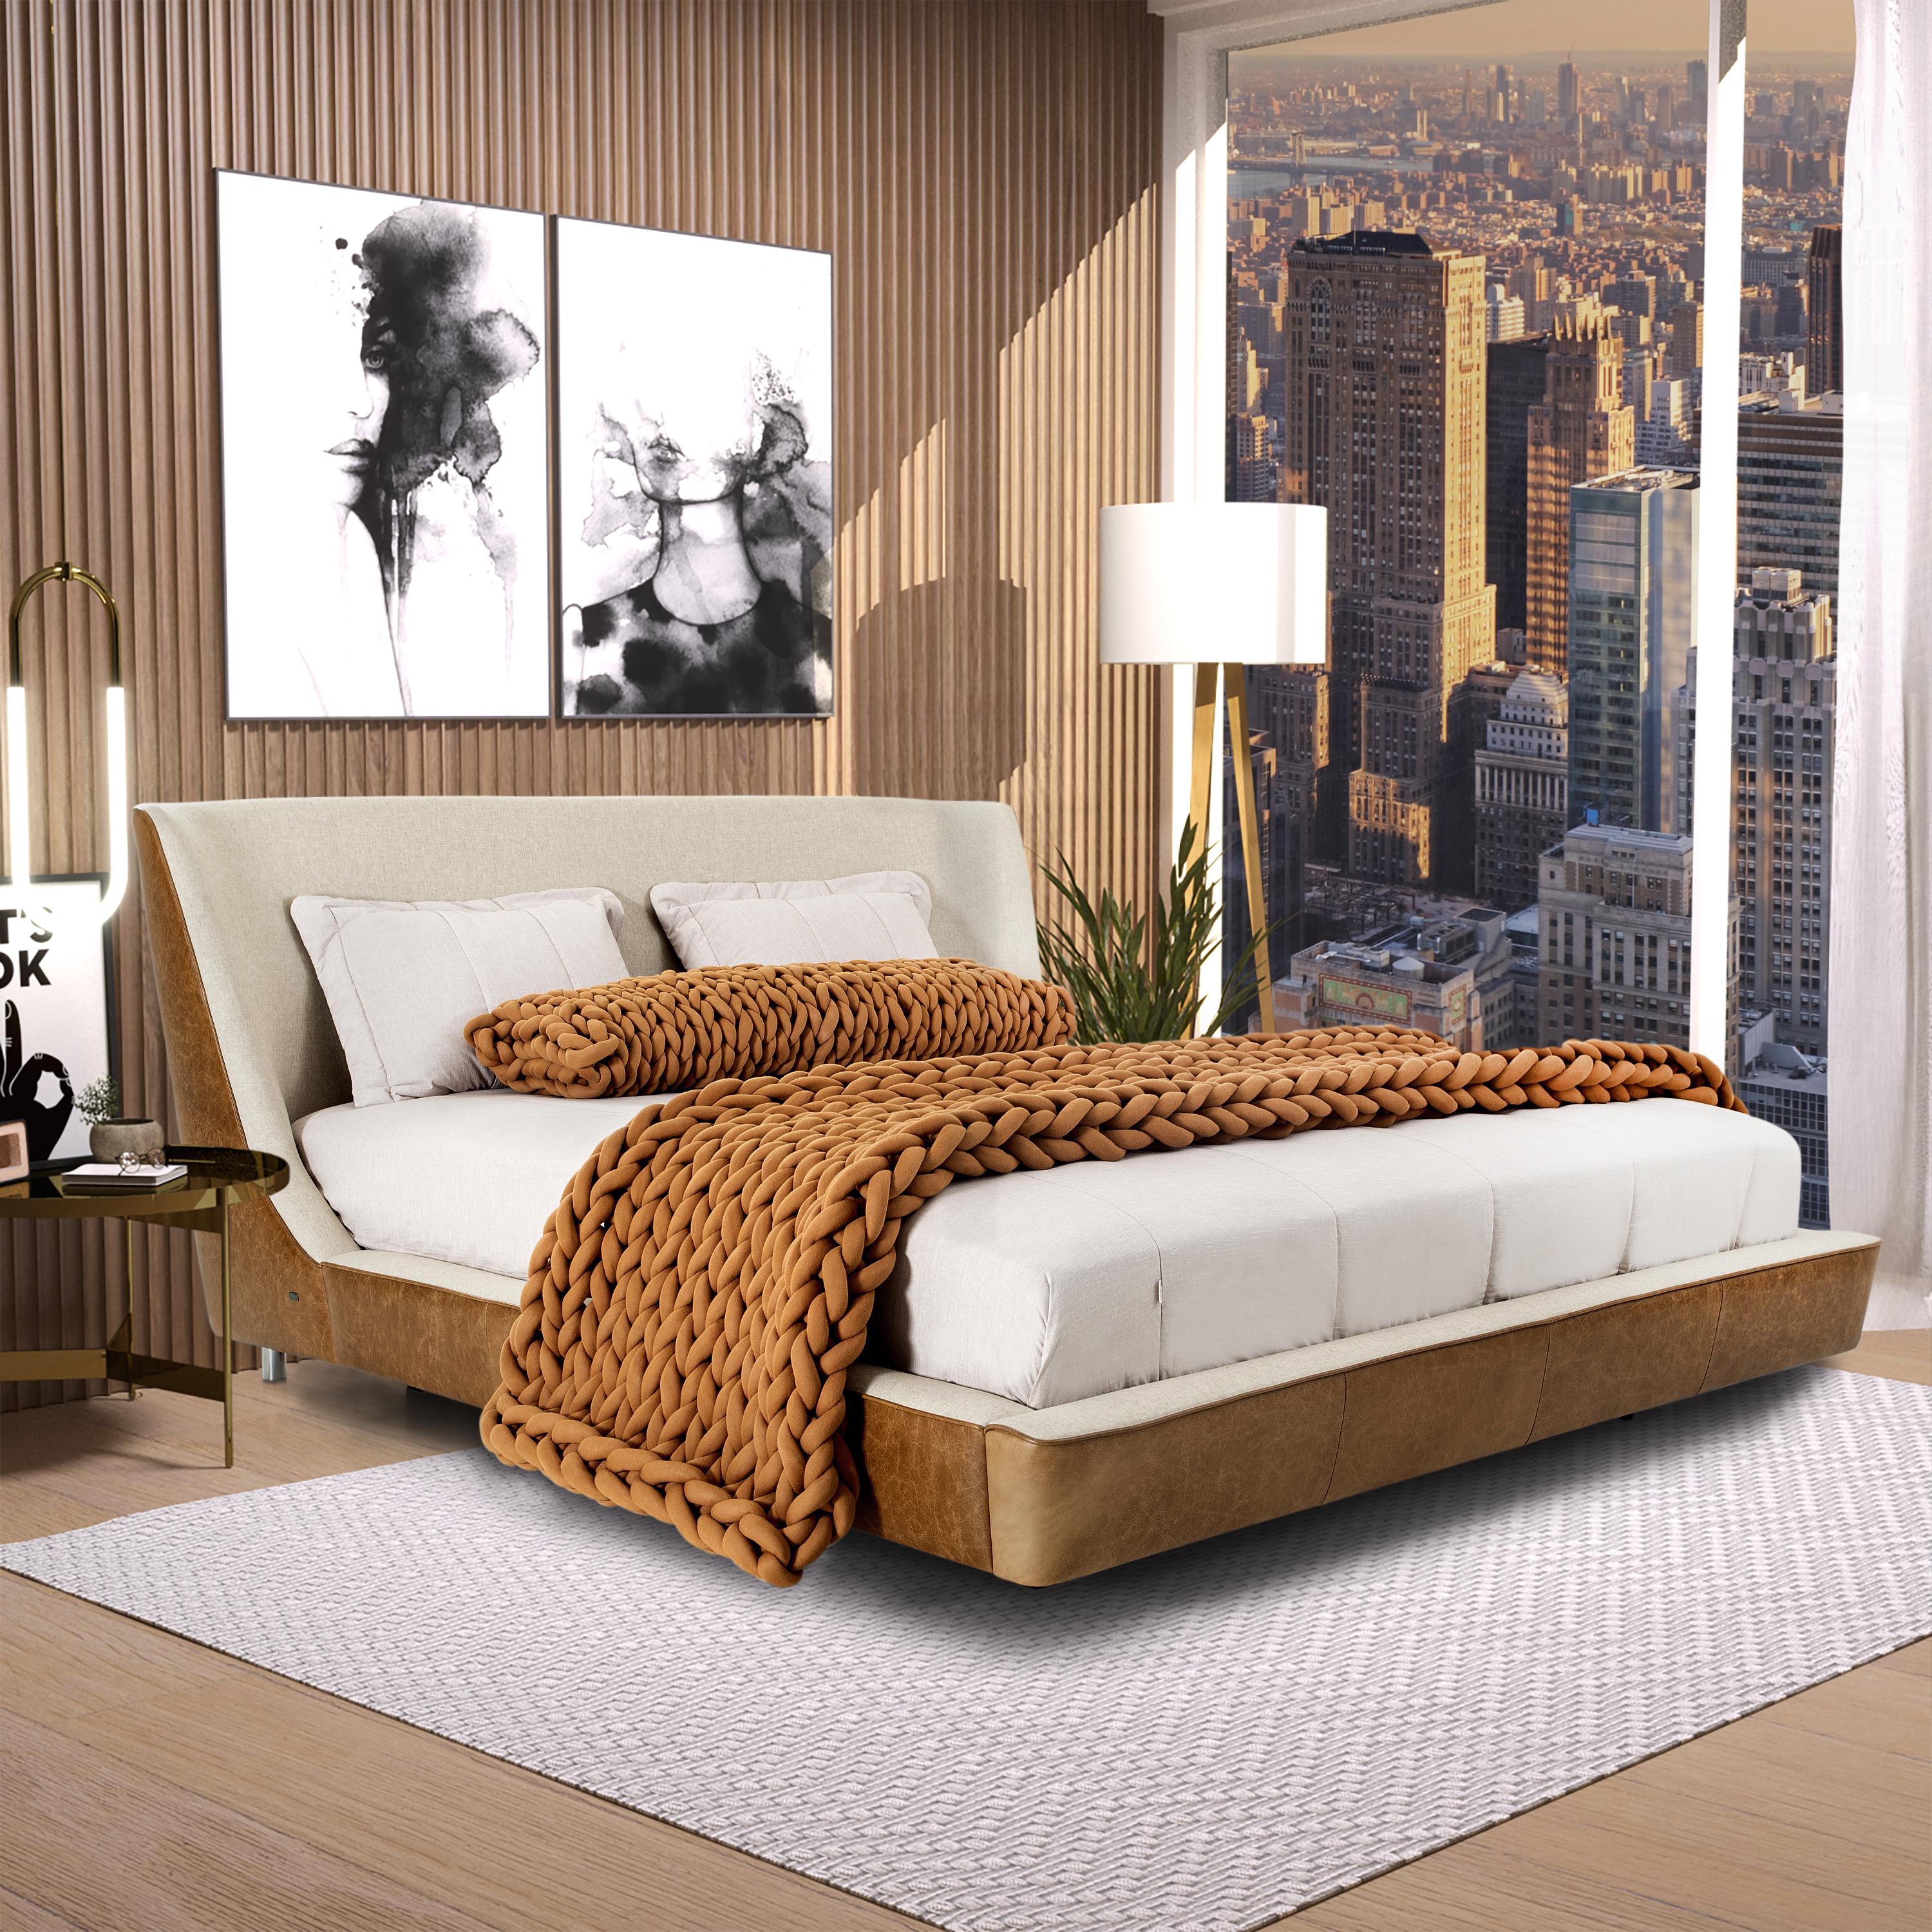 The amazing designers from the Uultis team have fabricated this beautiful Musa queen bed in an exquisite combination of oatmeal fabric and brown leather, with a shell shape as a headboard that is supported by an angular frame, covered with foam and